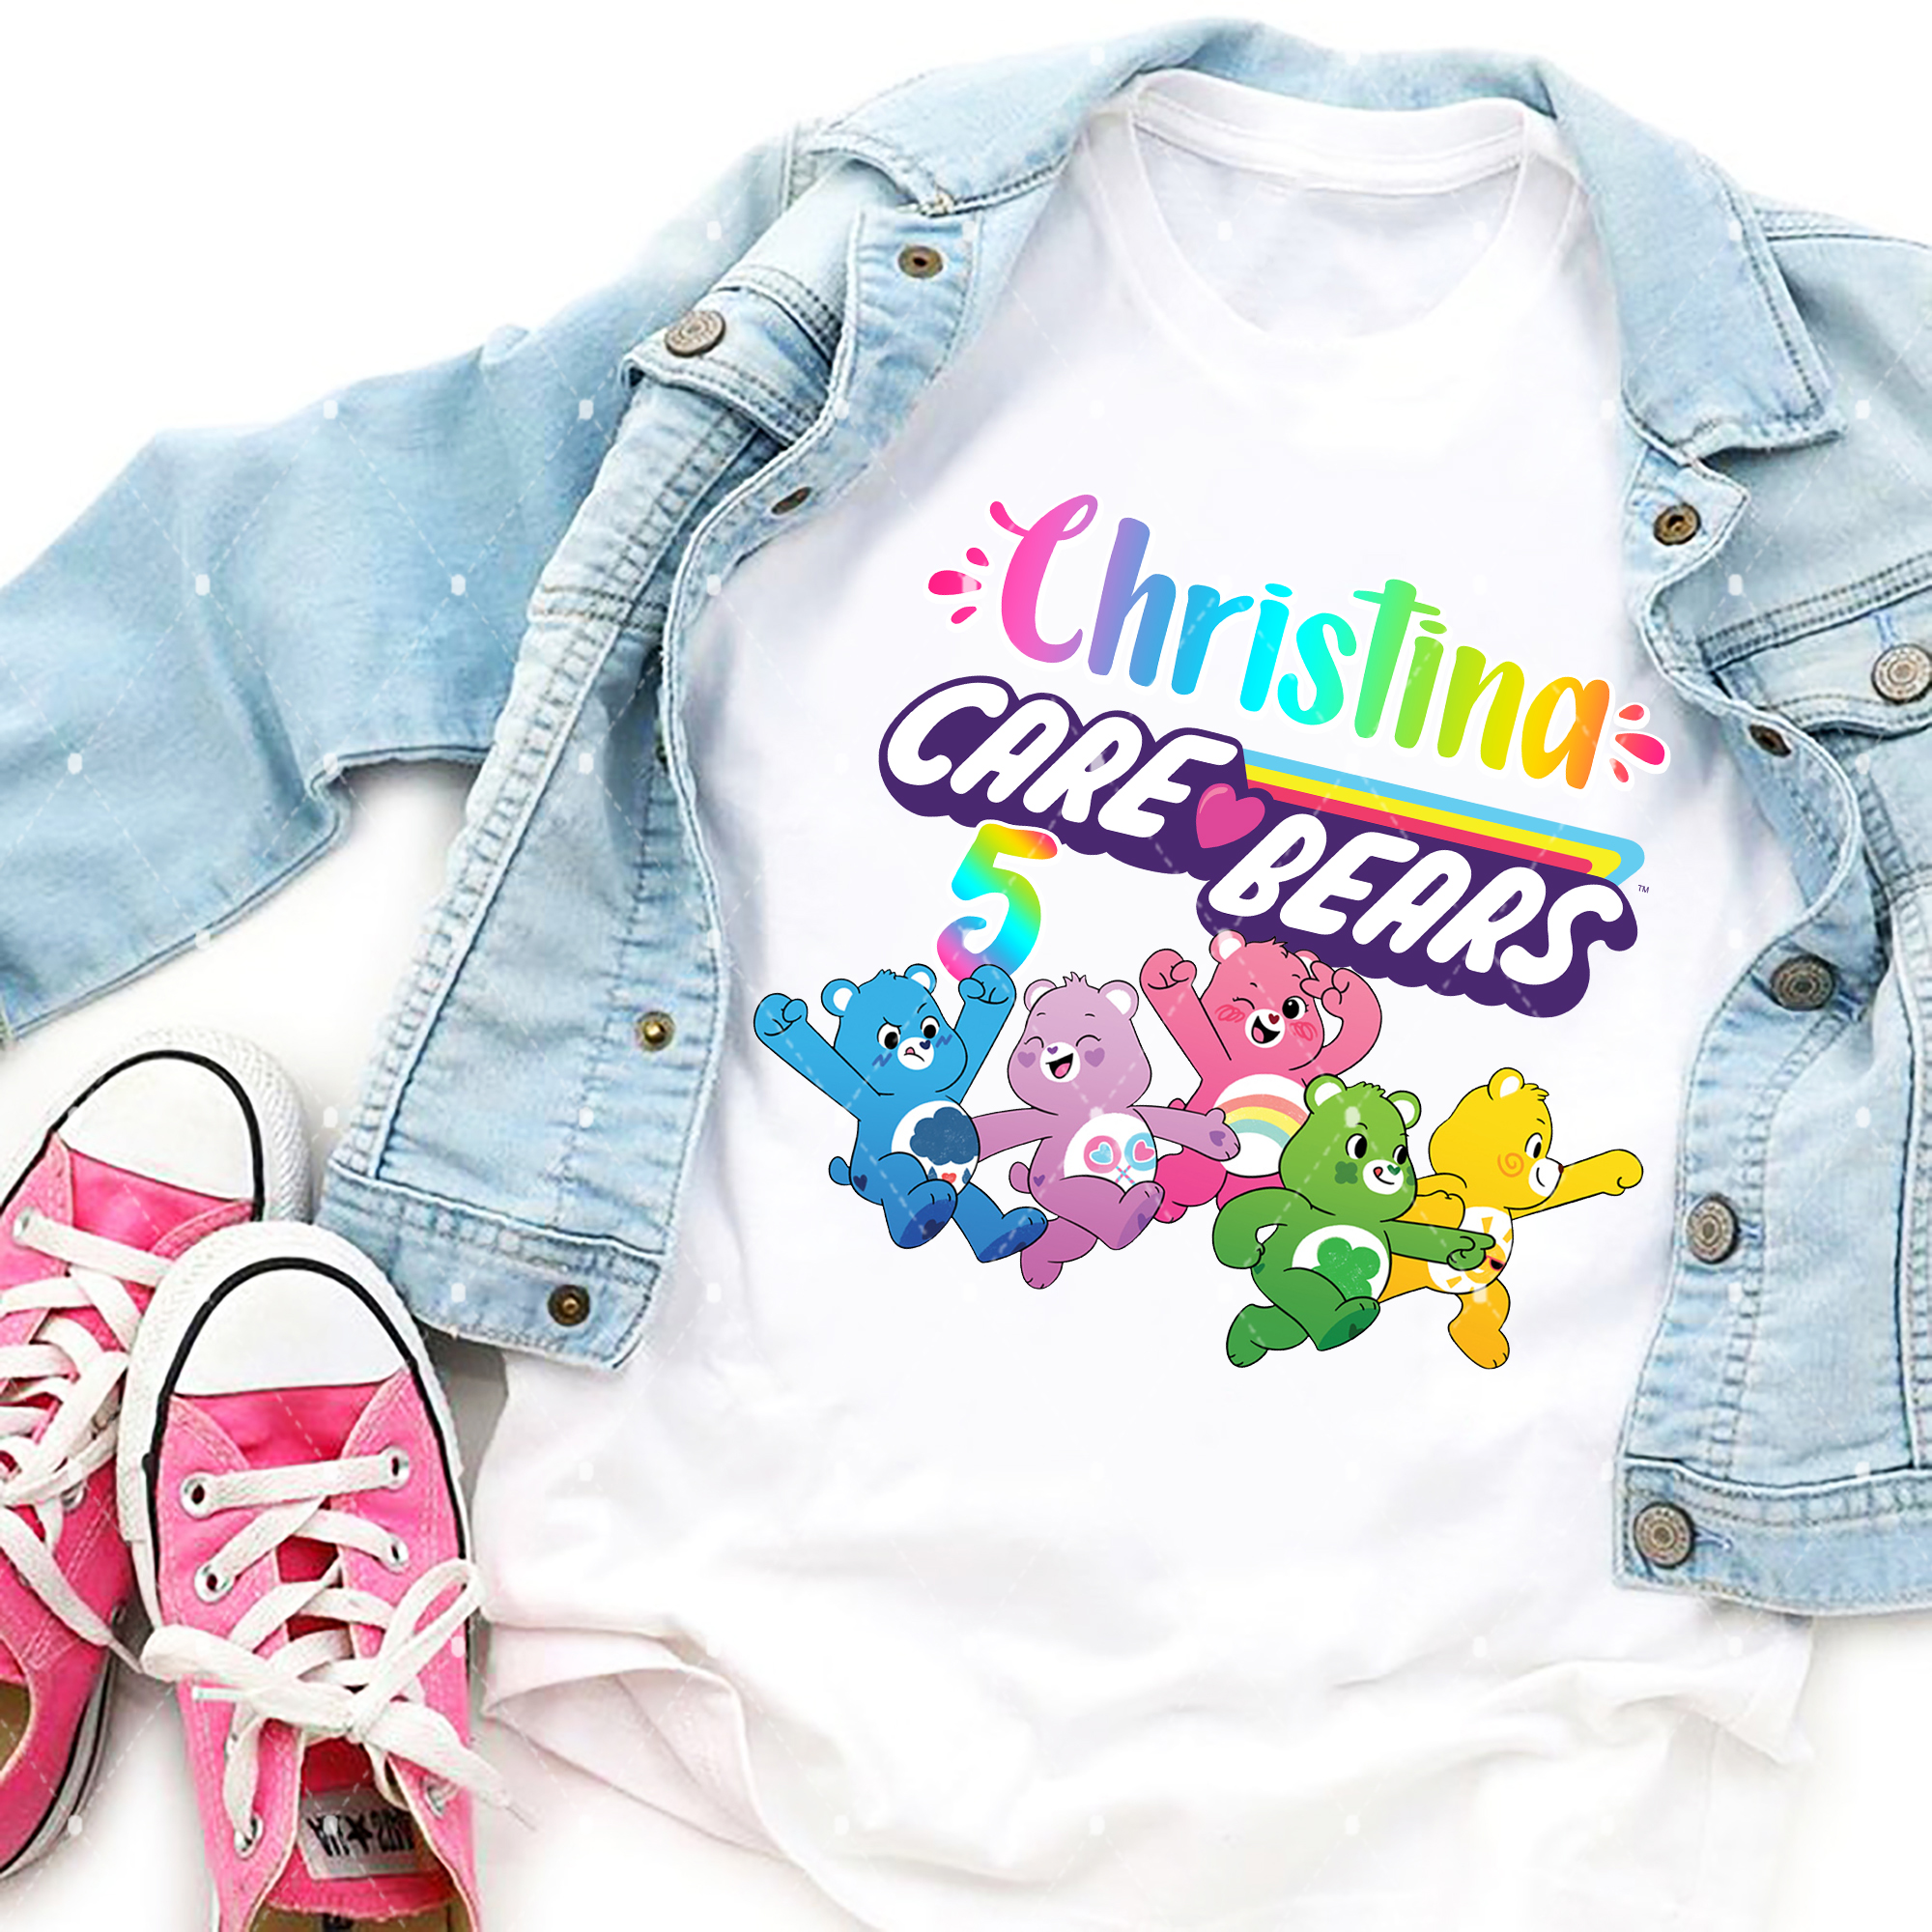 Personalized Care Bears Family Matching Birthday Shirt, Care Bears Family Birthday Shirt, Care Bears Birthday Family Custom Age and Name